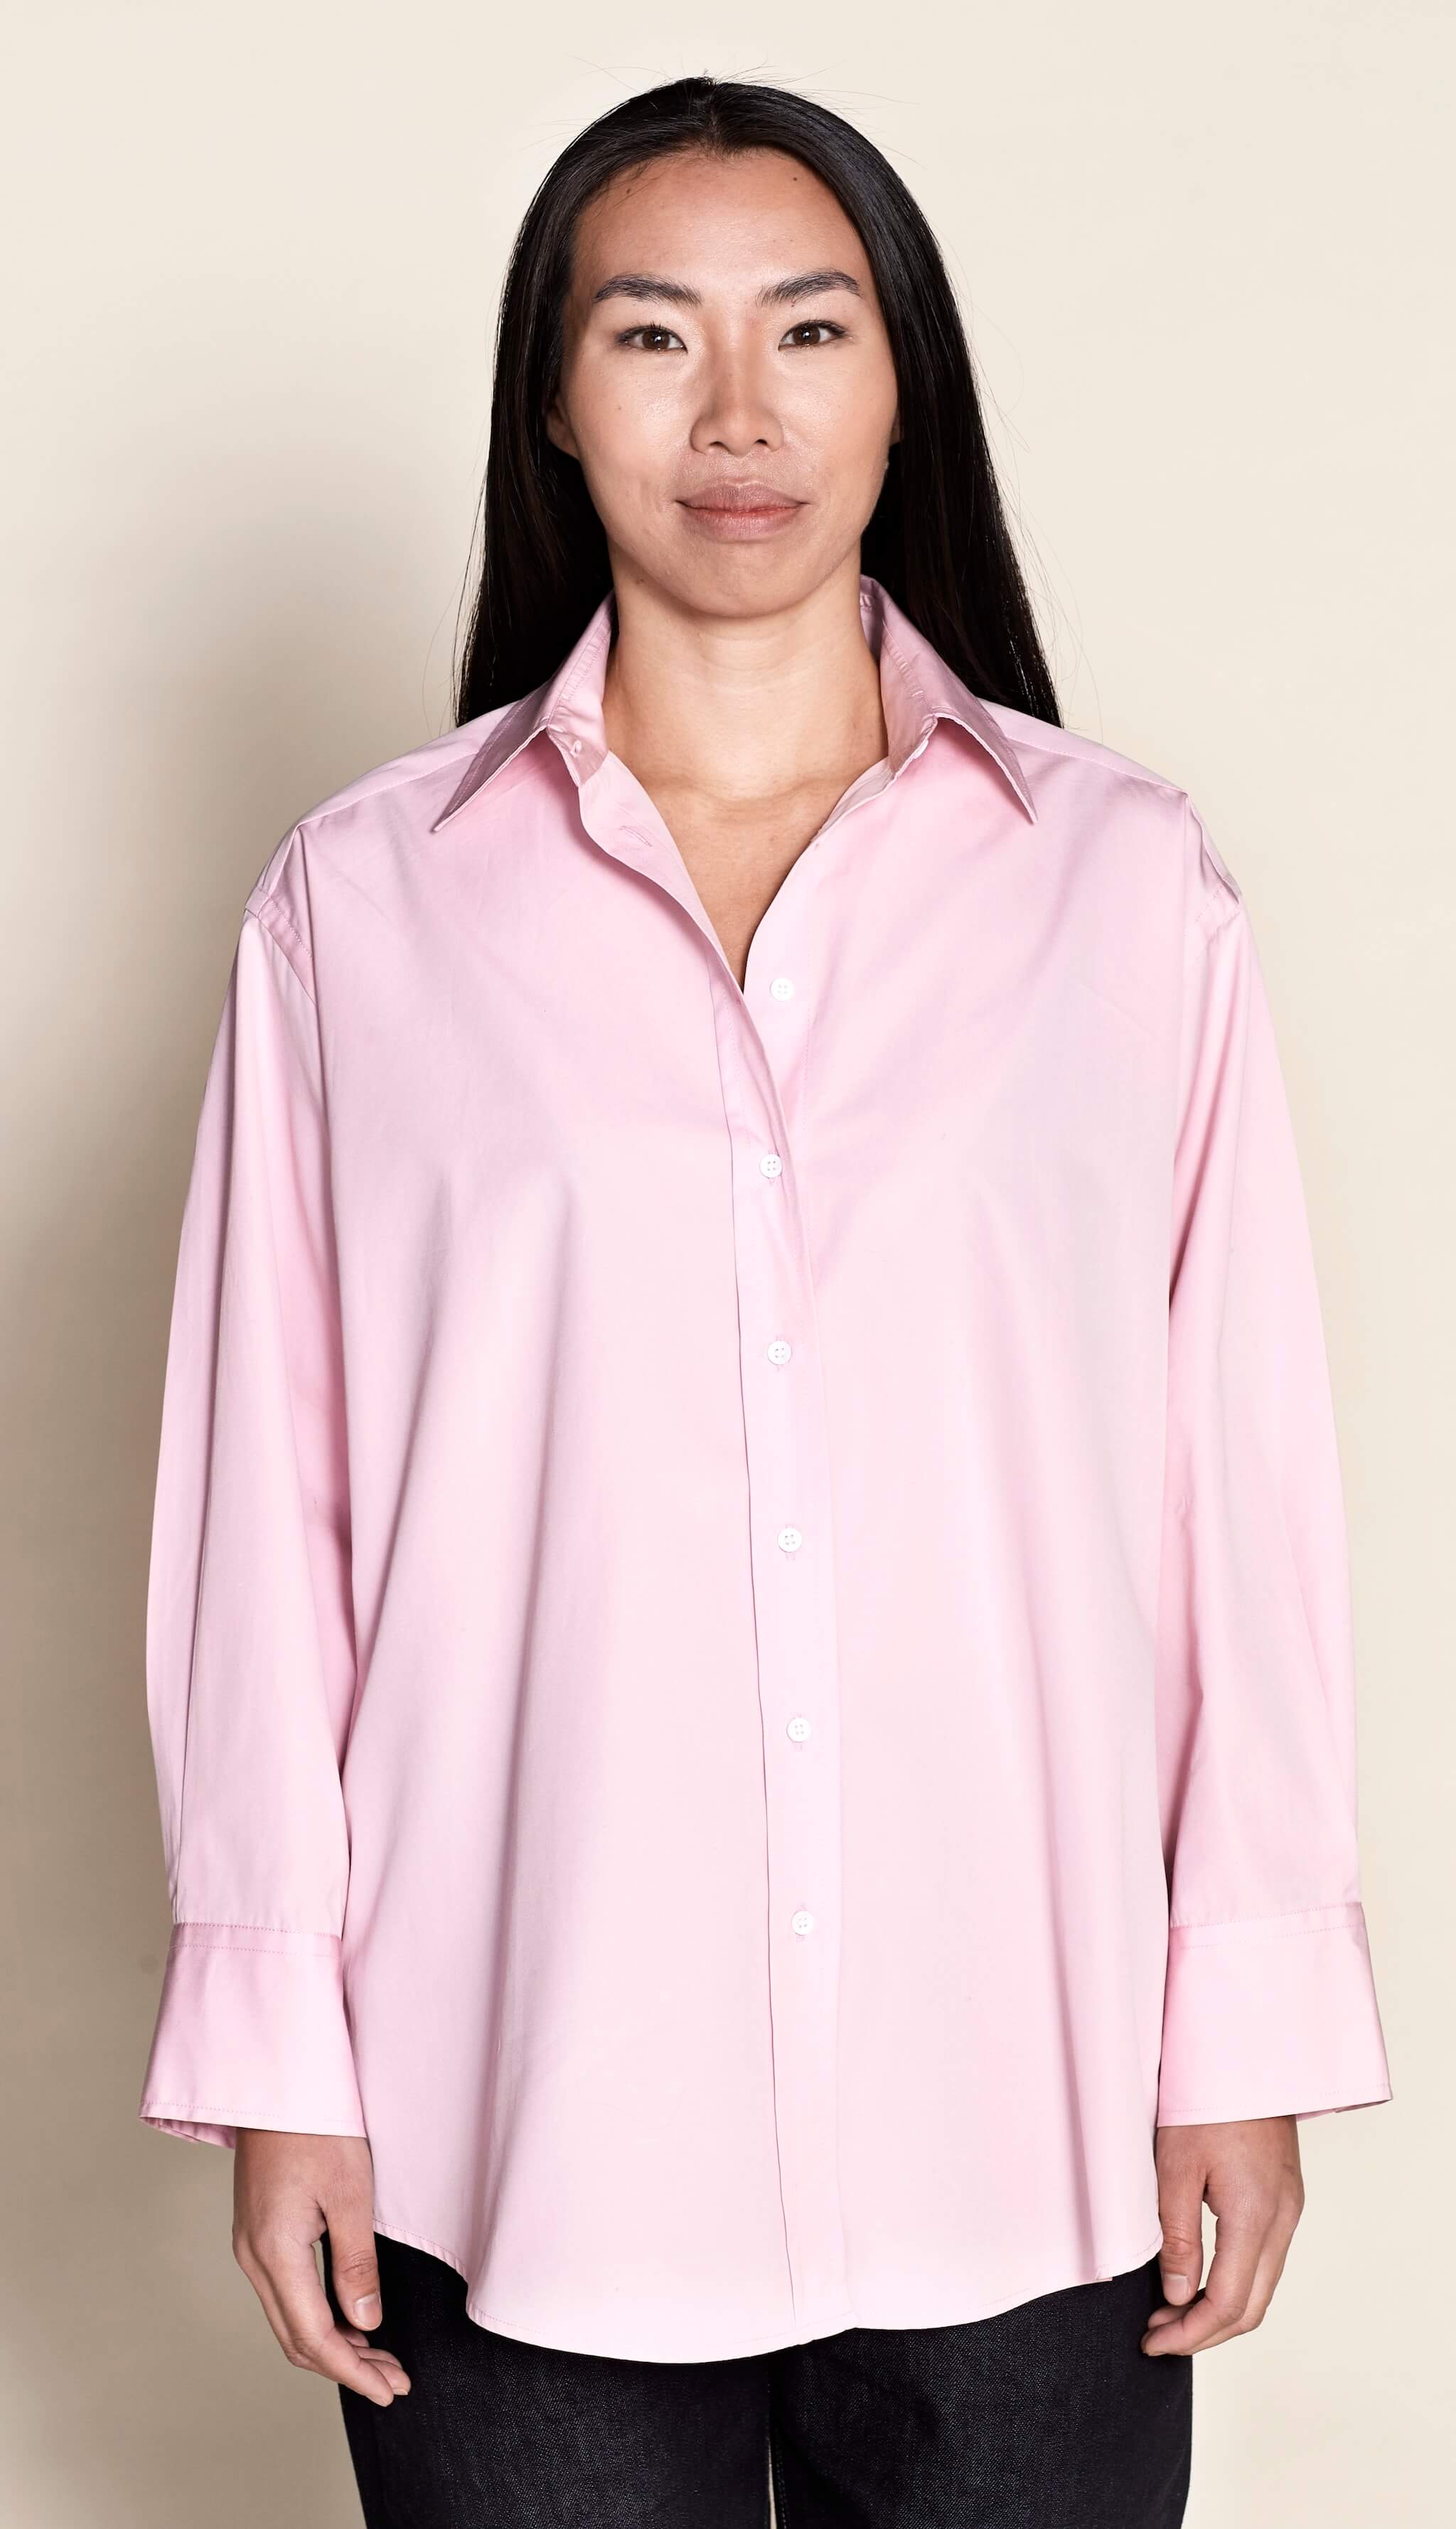 Model presenting Cyme Copenhagen's elegant oversized pink shirt, featuring a relaxed cut that combines comfort with Danish design, reflecting the brand's dedication to sustainable fashion and offering chic women's clothing for all sizes.